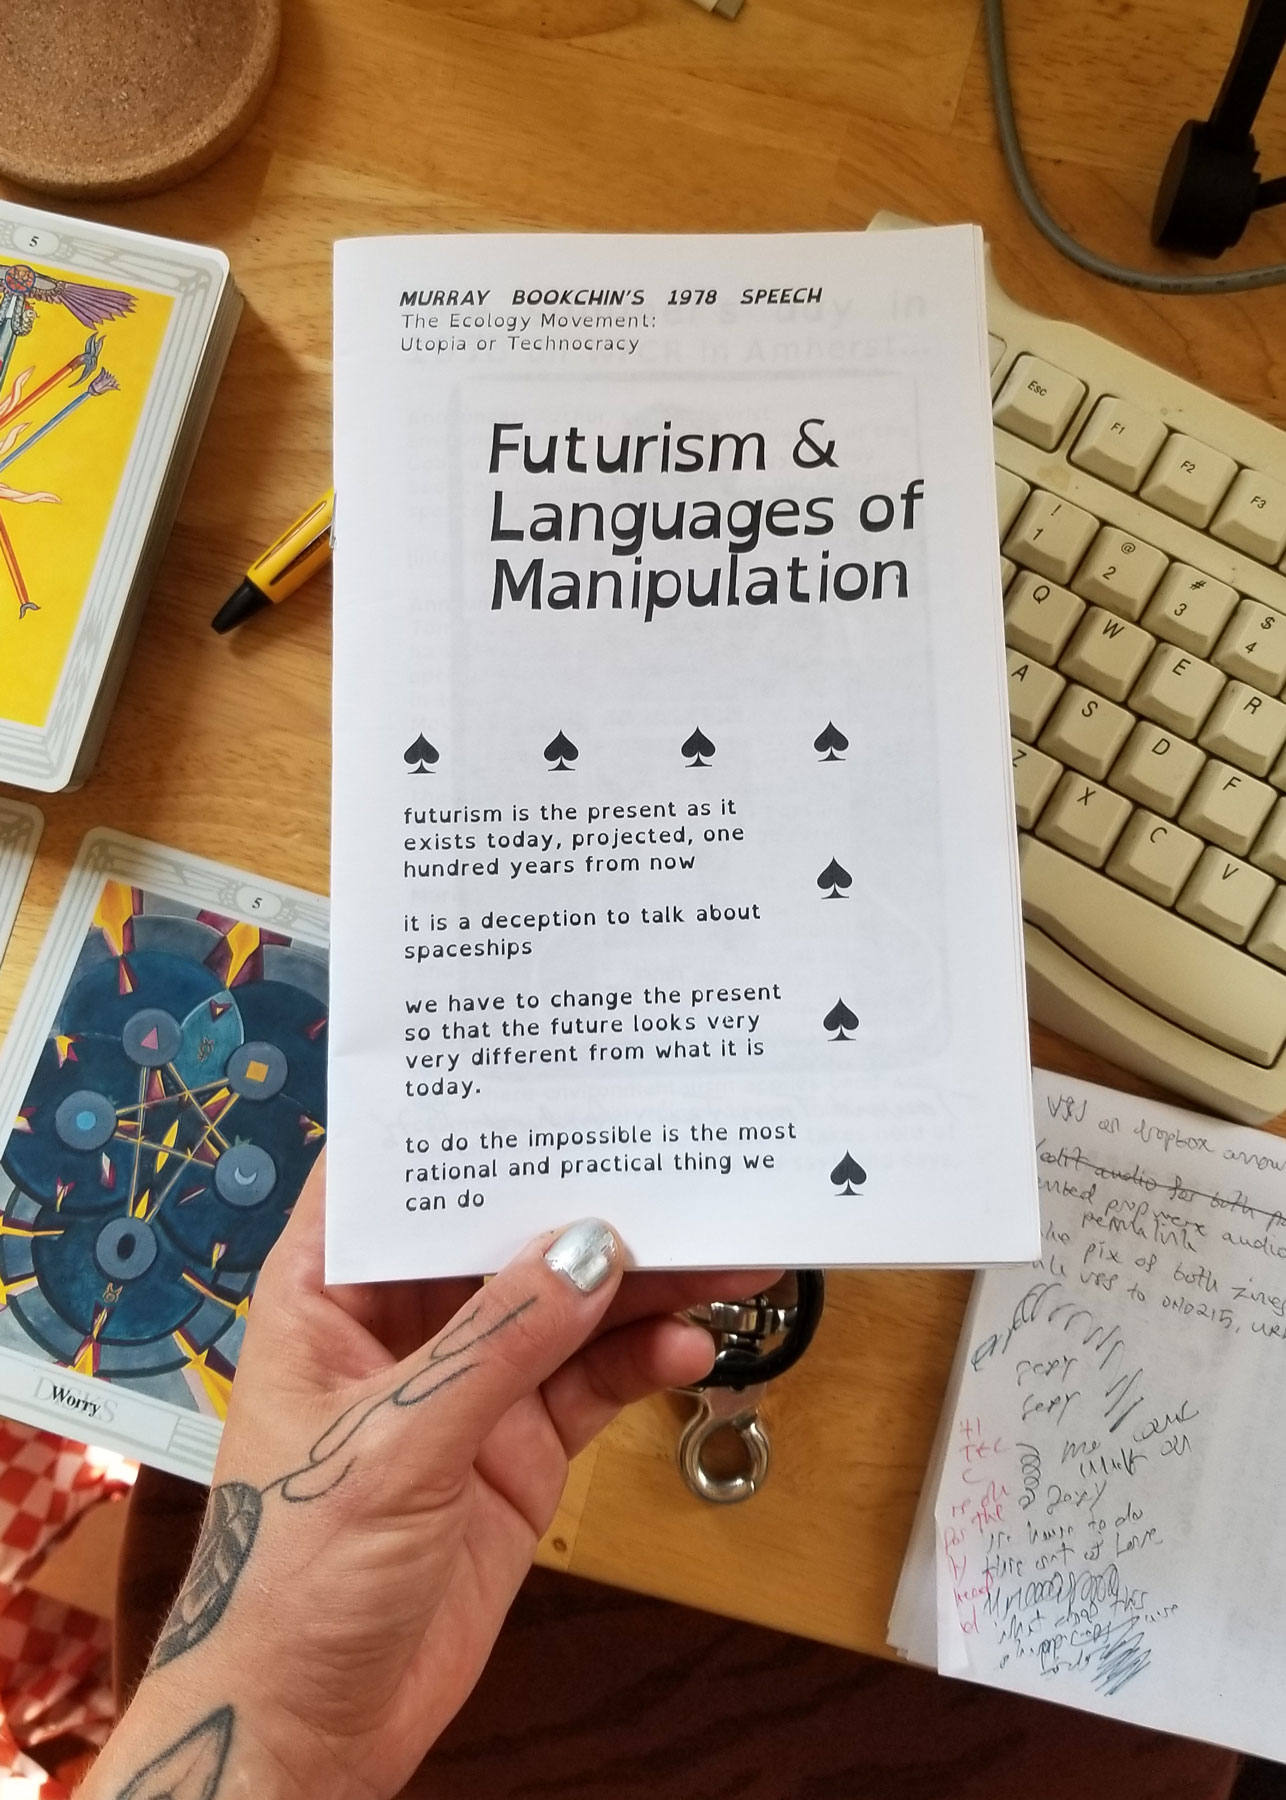 My left hands hold the booklet zine , with my keyboard and some tarot cards on my desk in the background. The zine says FUTURISM & LANGUAGES OF MANIPULATION